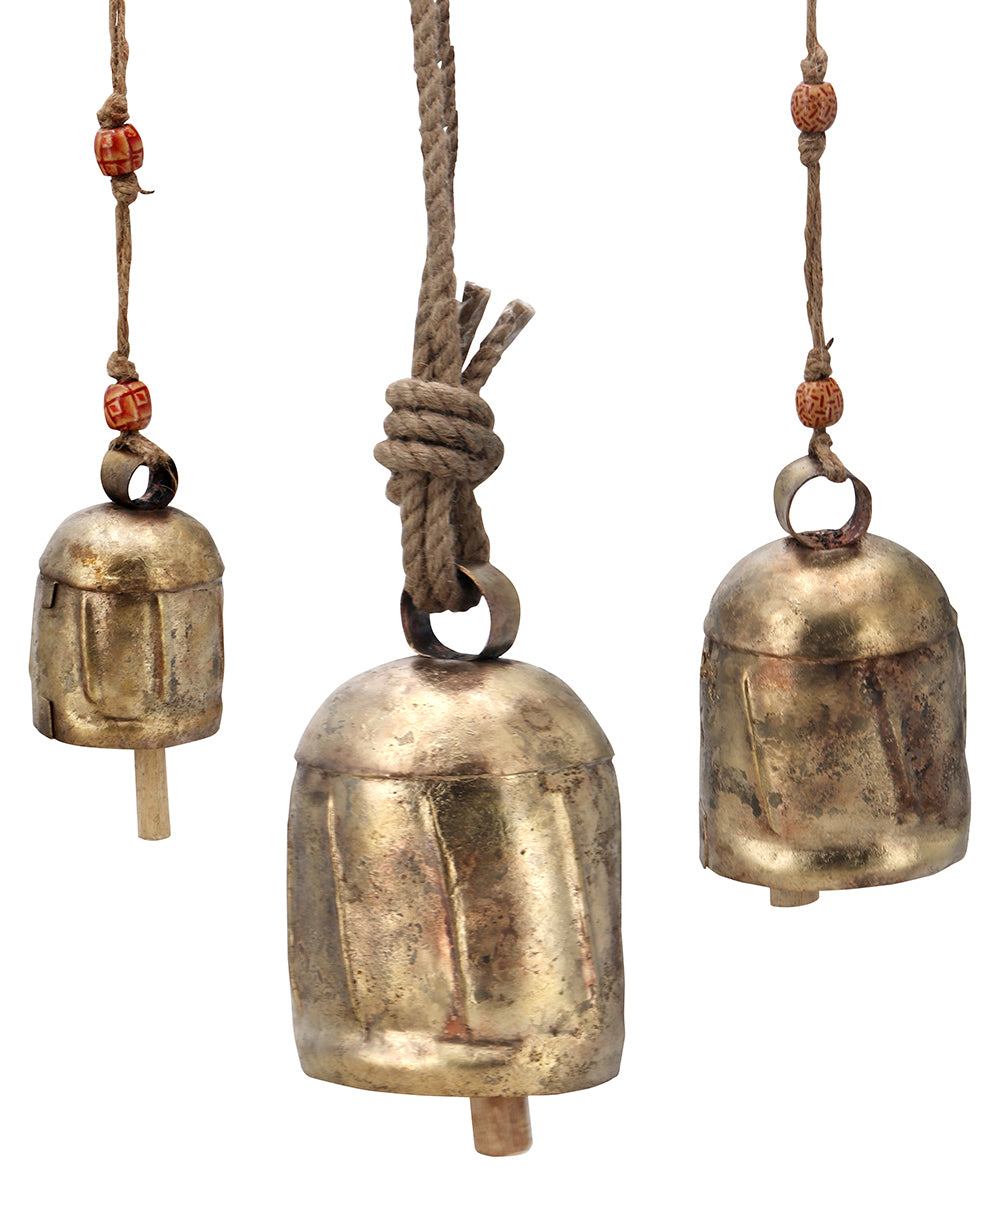 Deep Toned Traditional Indian Copper Cow Bells, Fair Trade